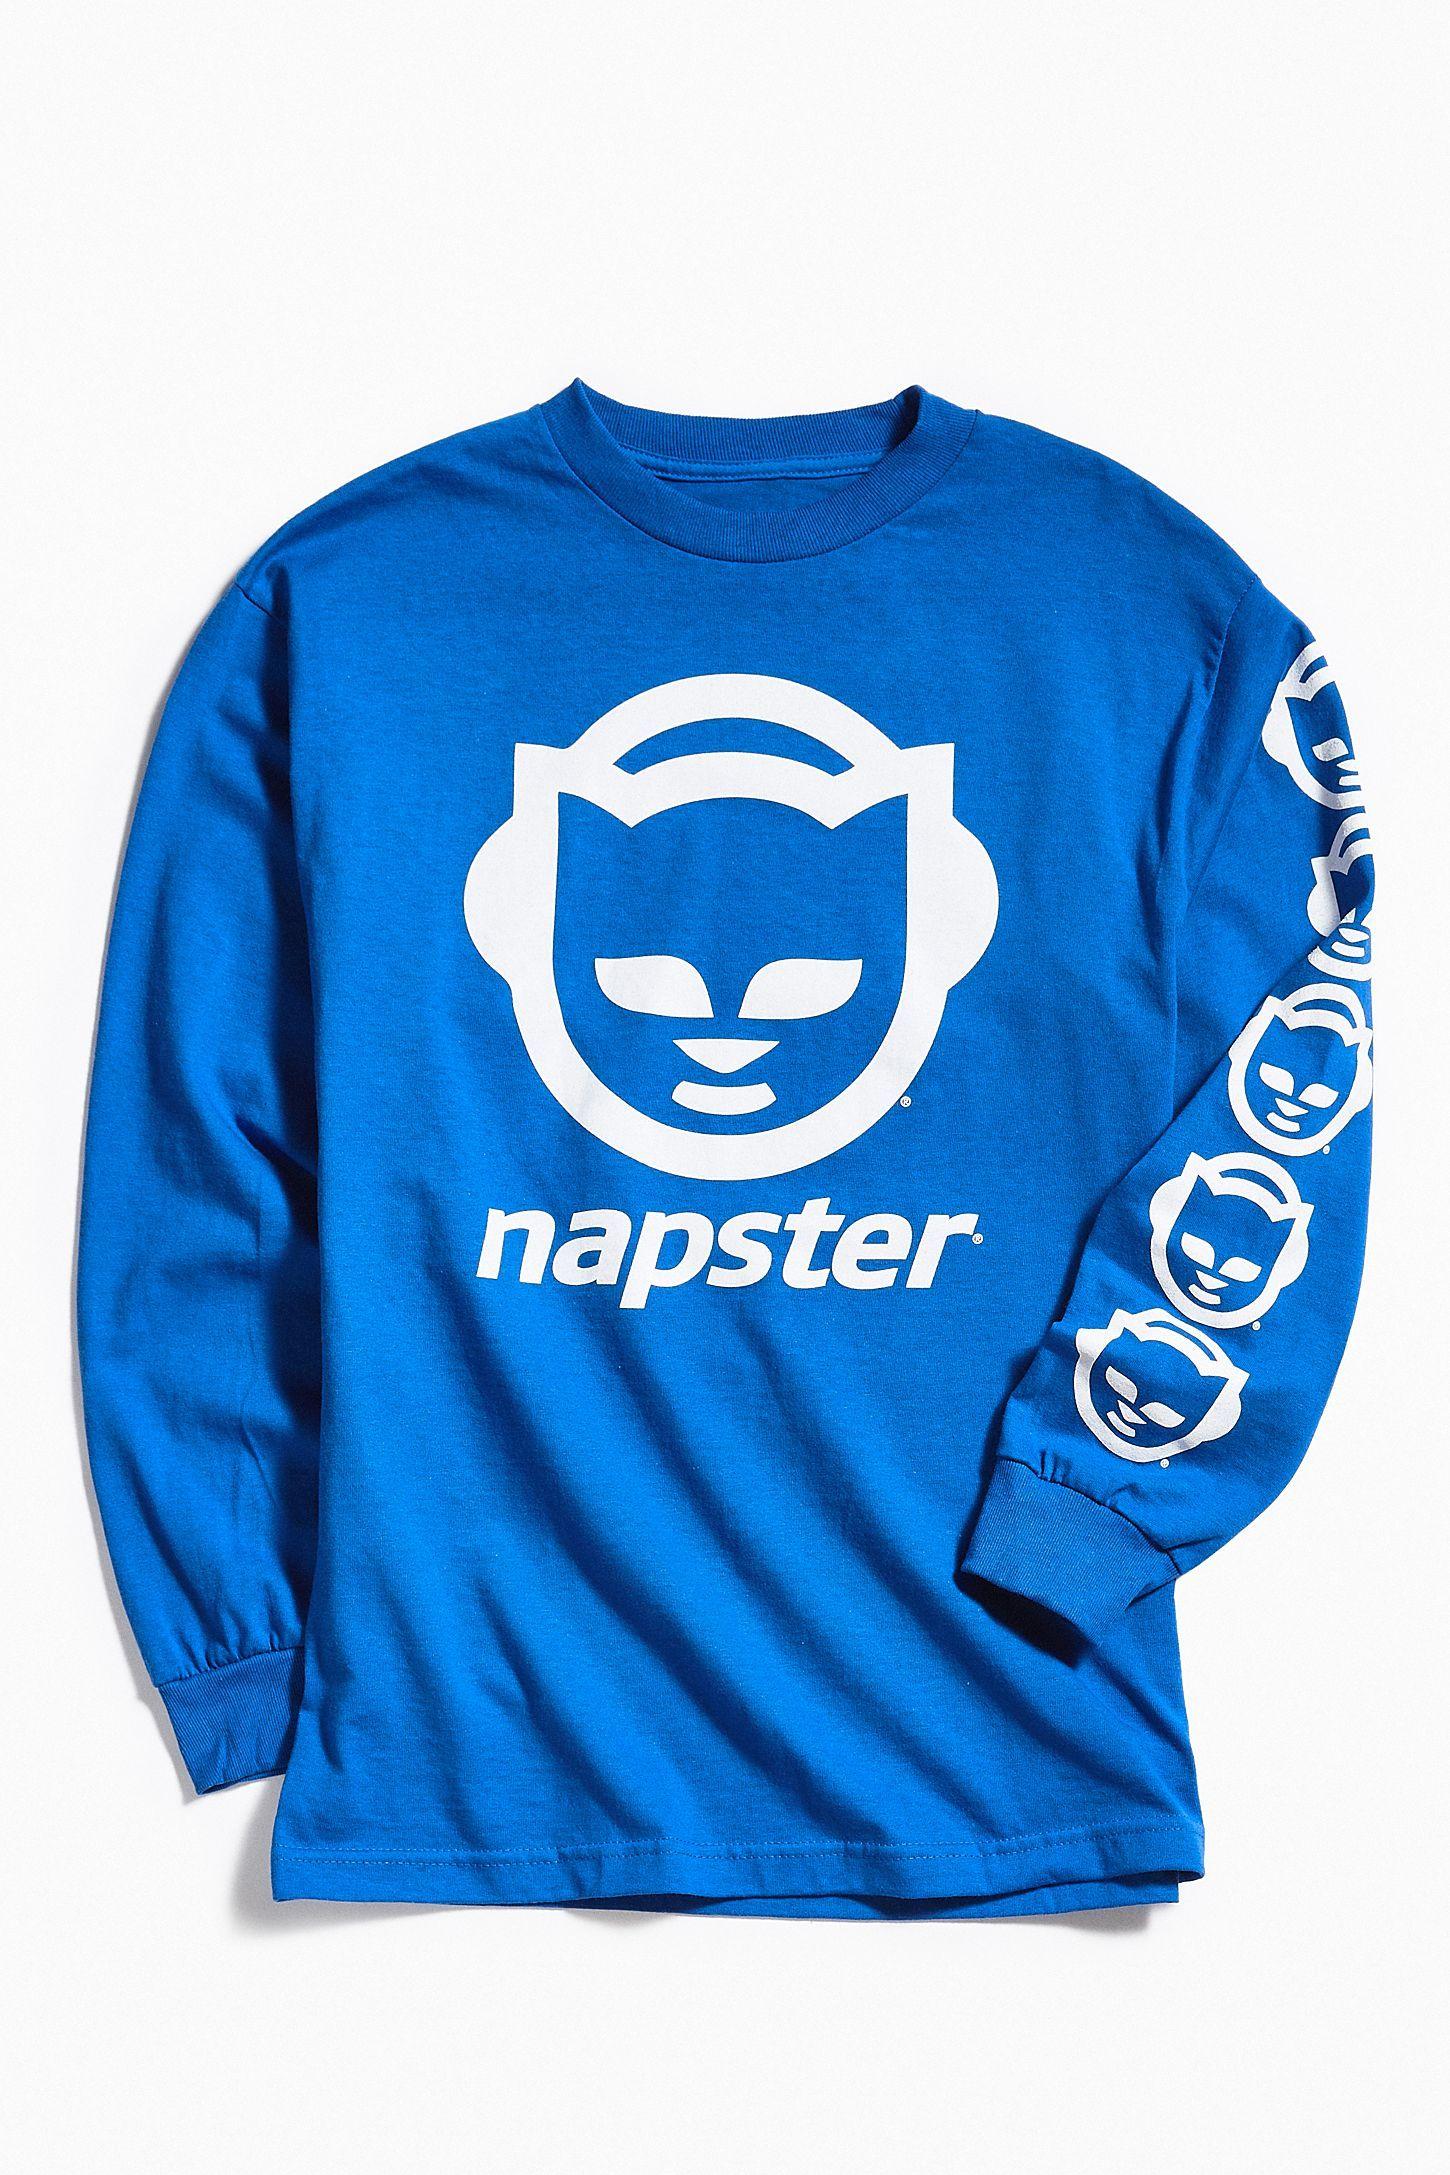 I Can Use Napster Logo - Napster Logo Long Sleeve Tee | Urban Outfitters